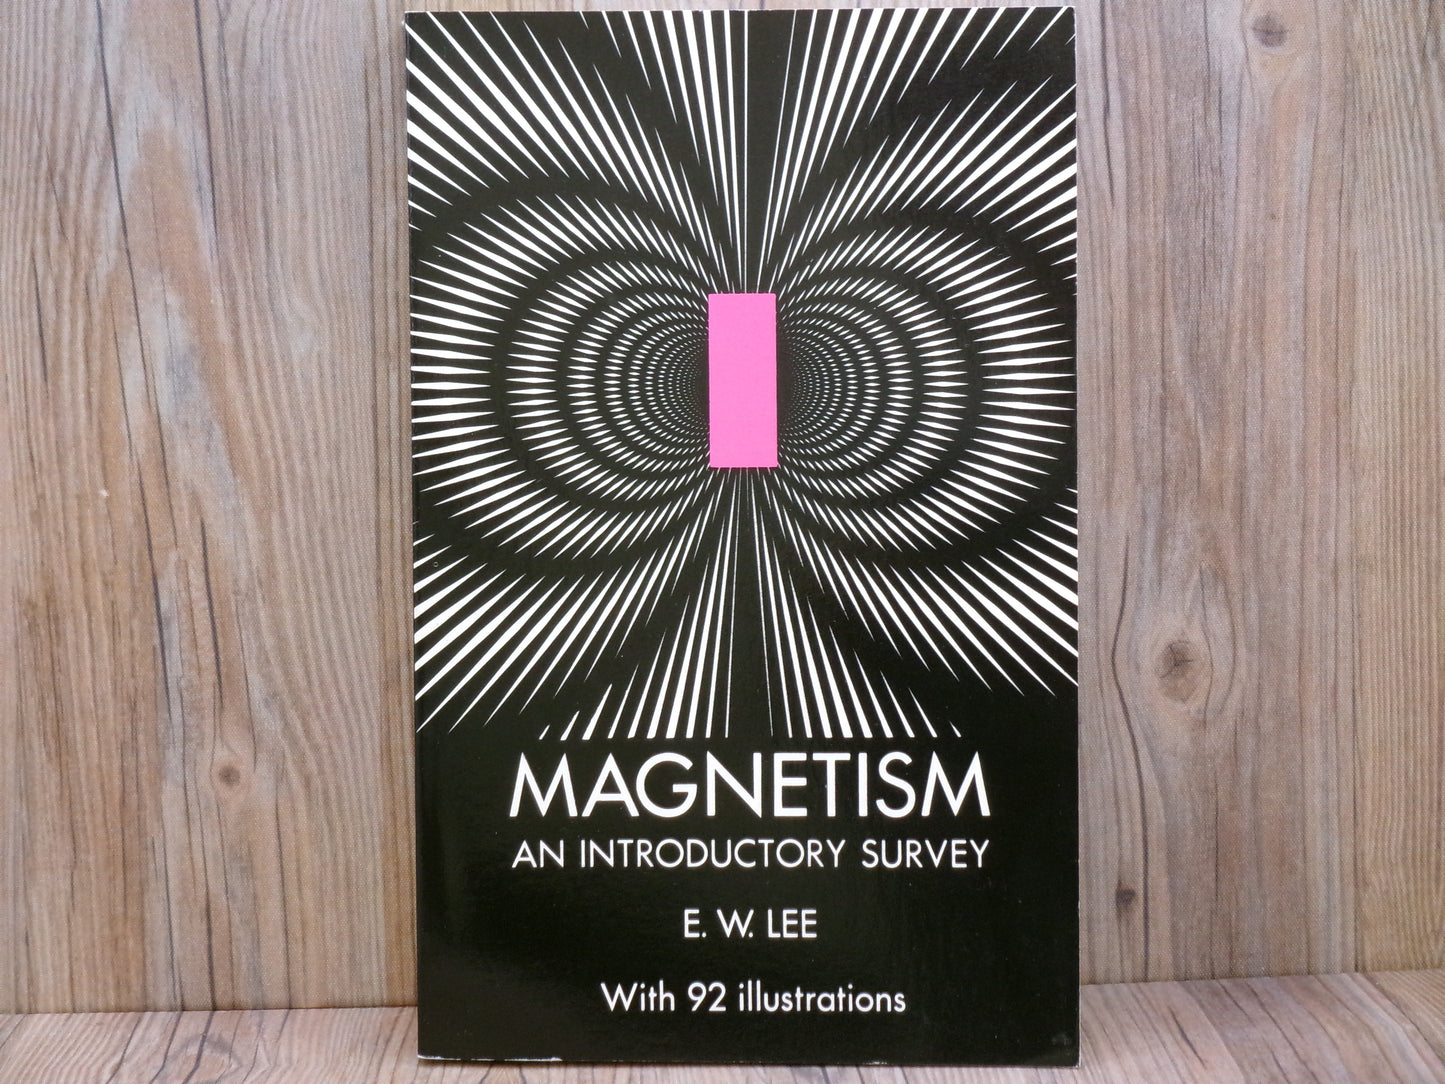 Magnetism An Introductory Survey by E. W. Lee